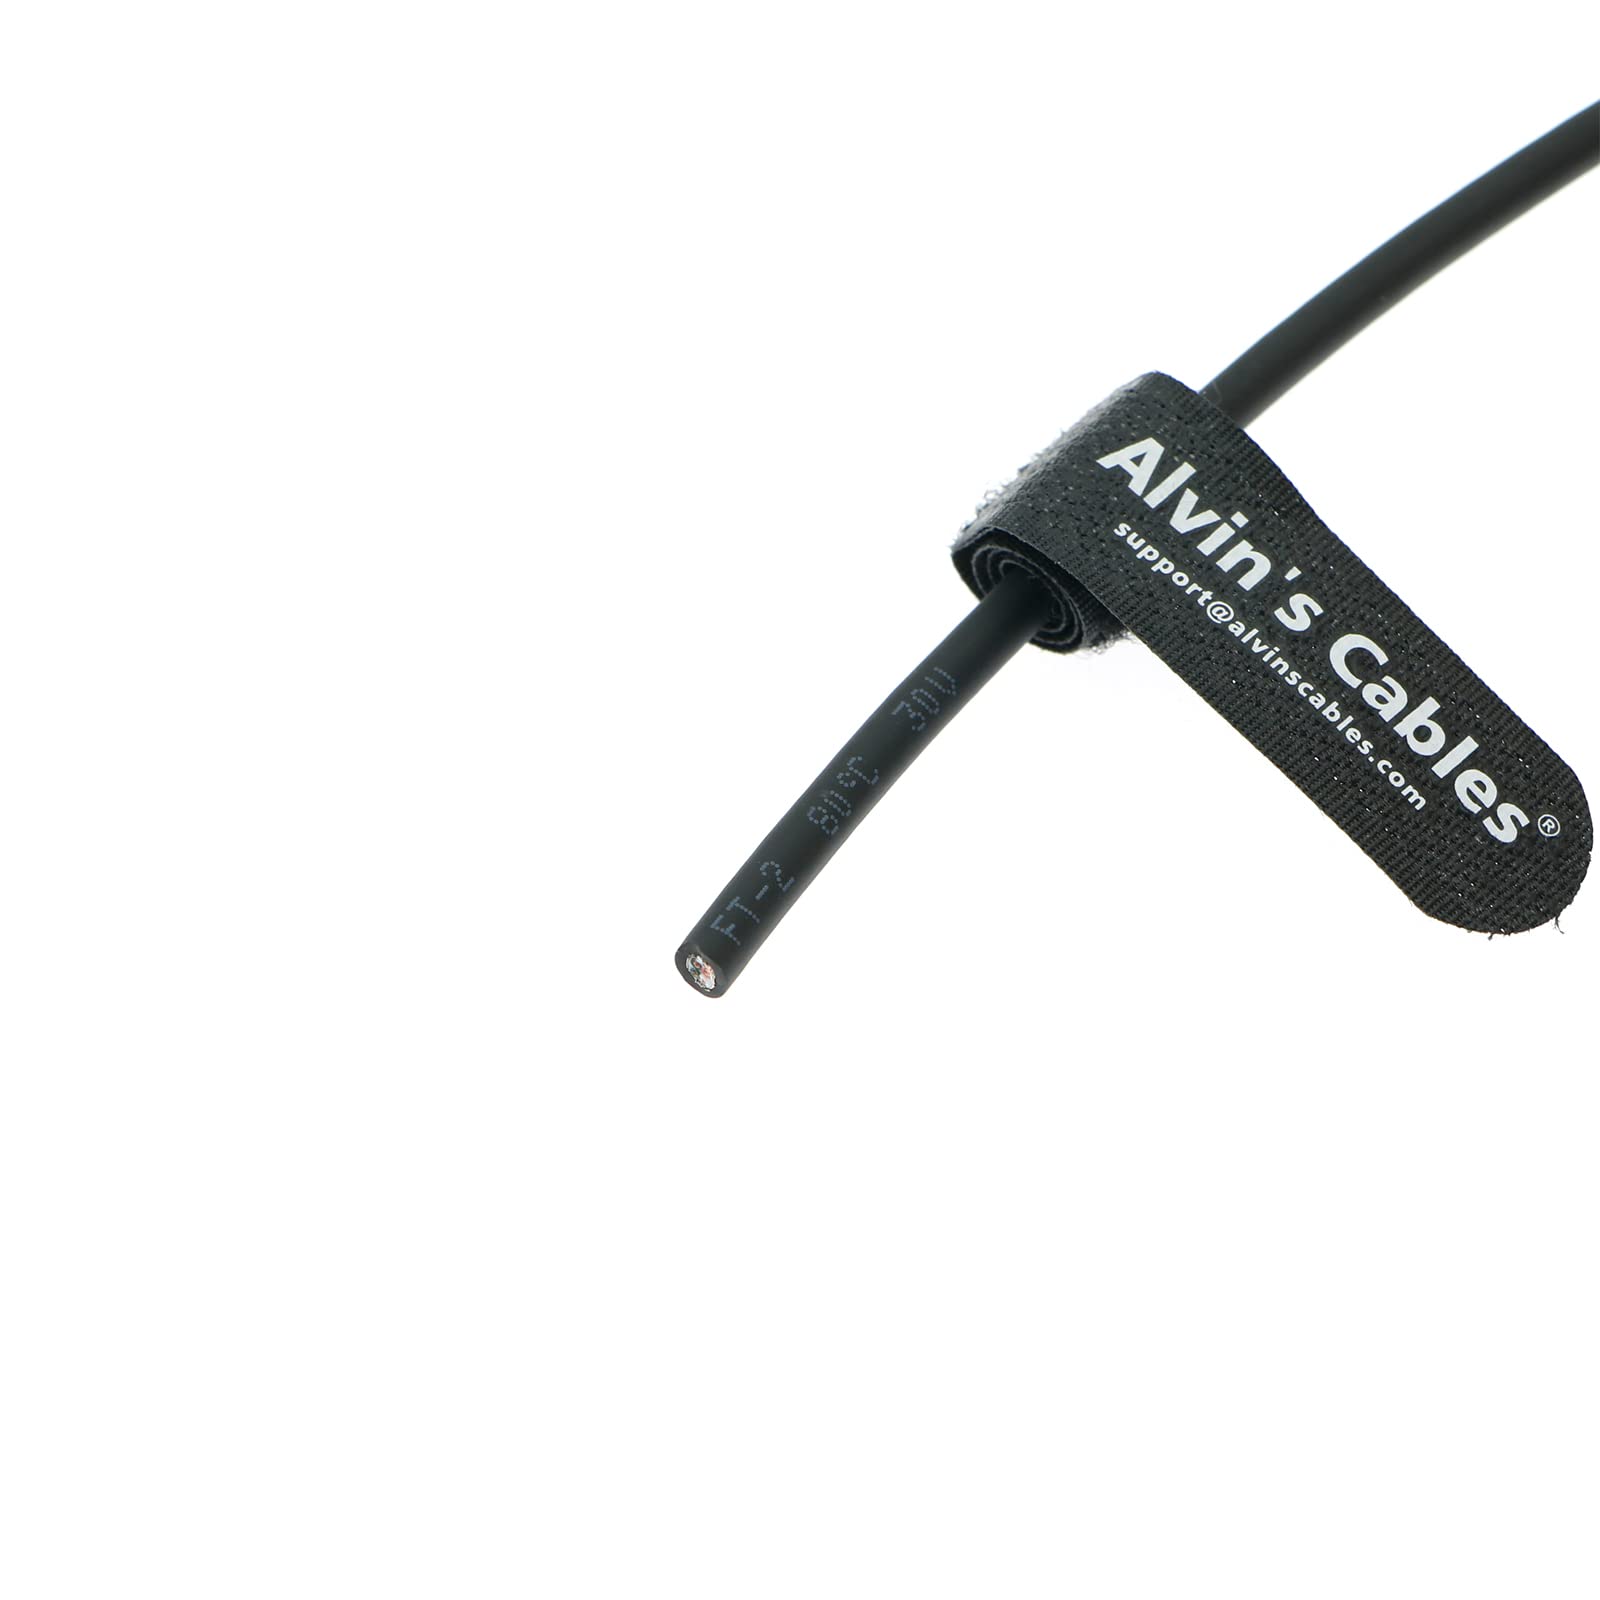 Alvin’s Cables Hirose 4 Pin Female HR10A-7P-4S to Flying Leads Power Cable for Sony Venice Sound Devices 664/633/702T SmallHD 702/ACE/DP7 Monitor